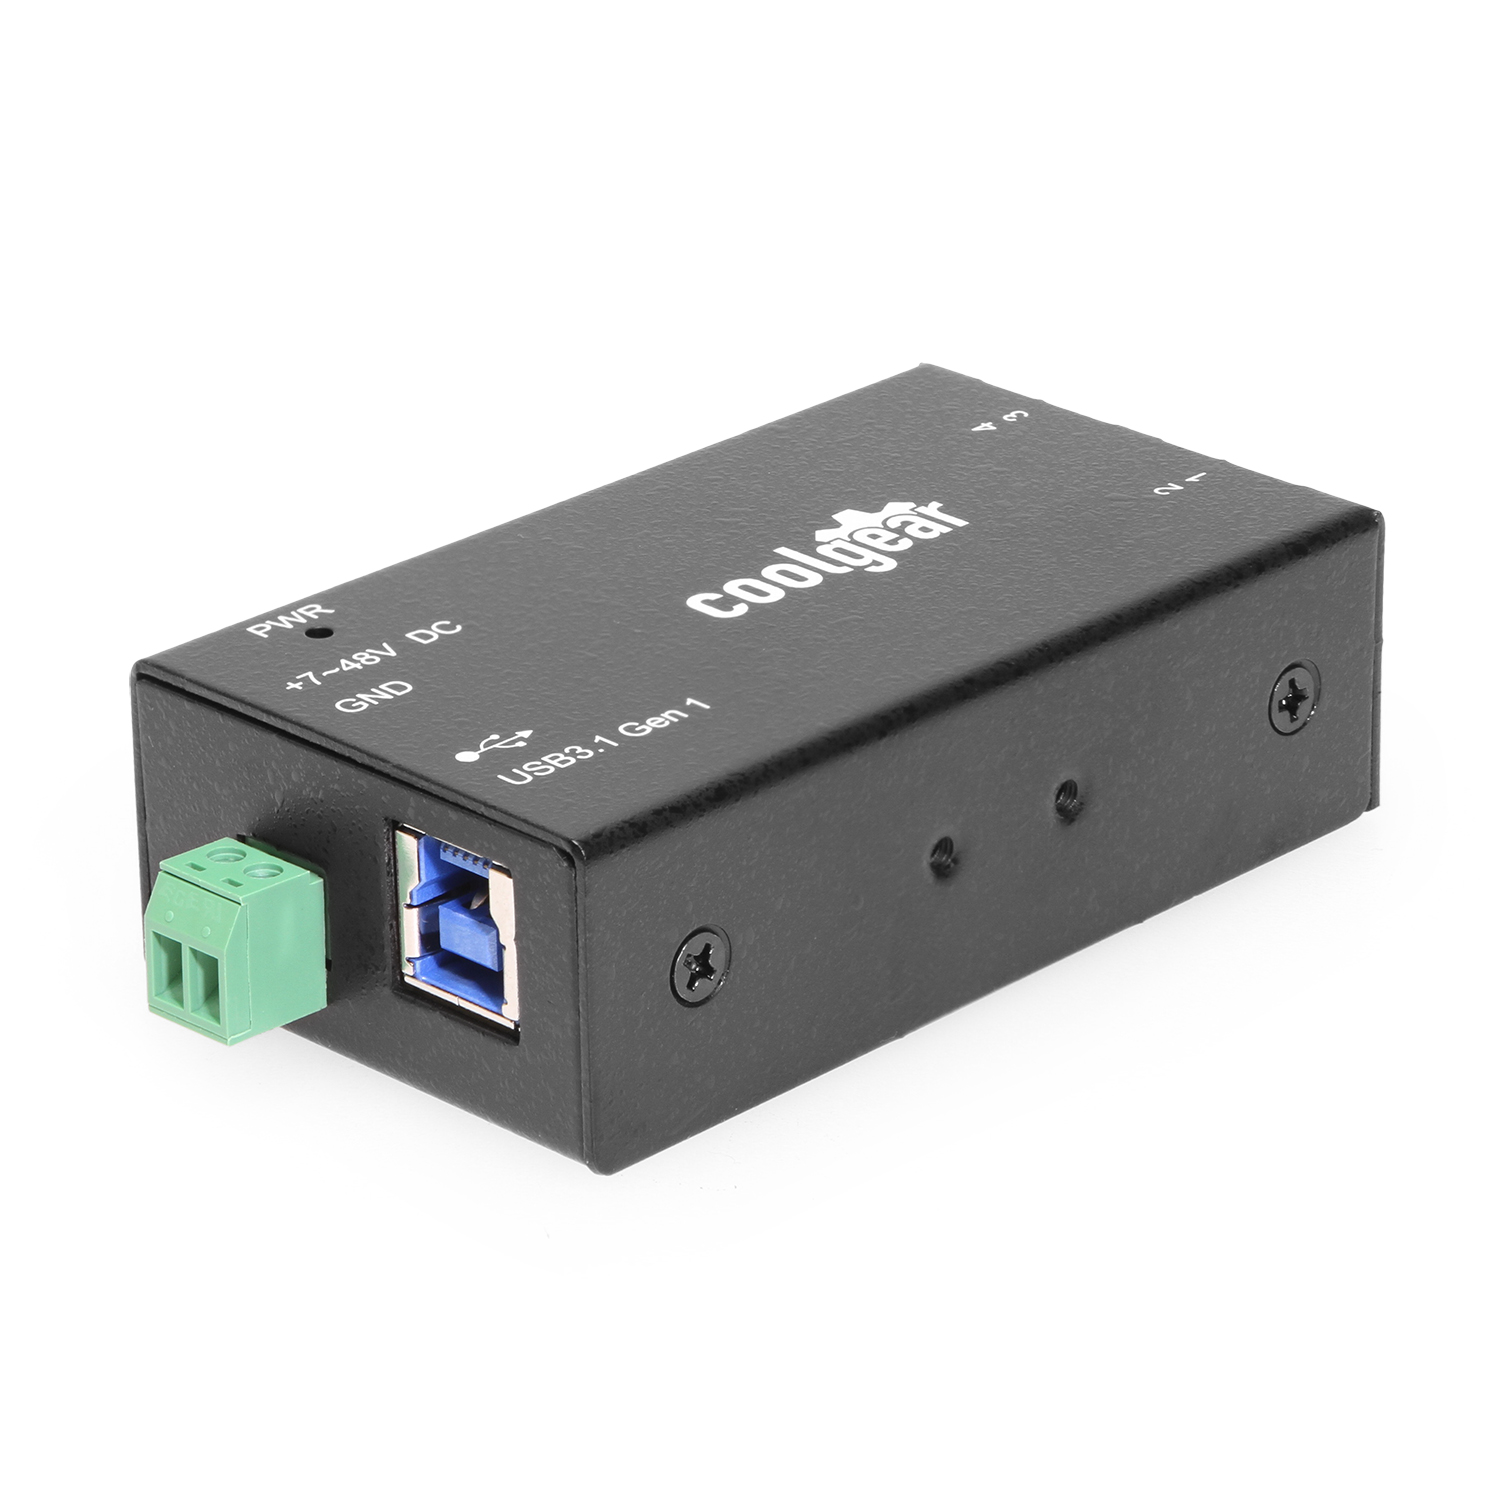 4 Port USB 3.2 Gen 1 Type-C Power Delivery Hub w/ ESD Surge Protection &  Screw Locking Ports - Coolgear